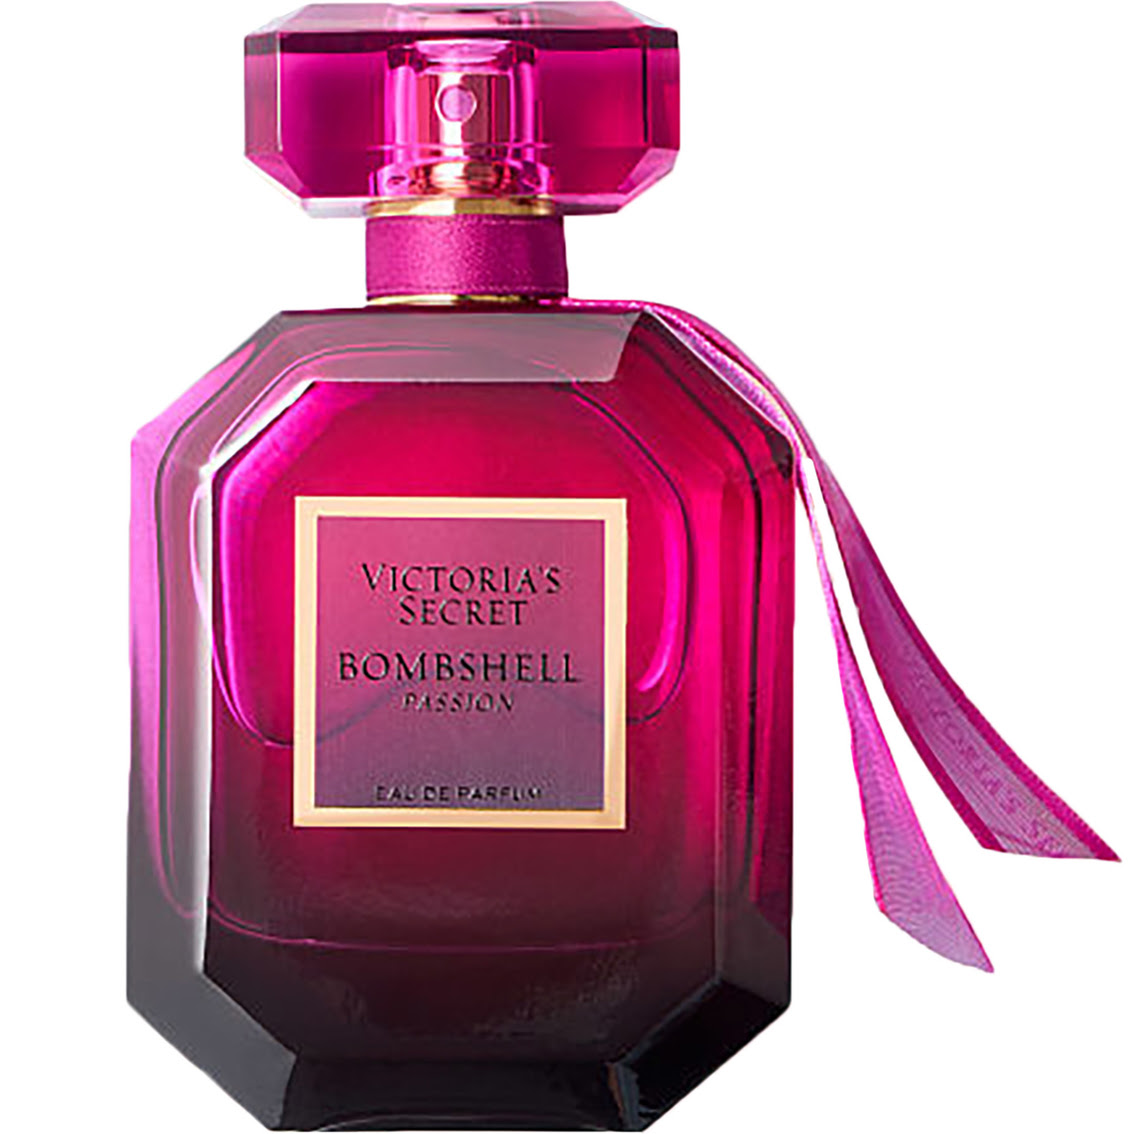 Web in this fragrance video i’m reviewing the new vs bombshell magic and comparing it to other bombshell flankers and holiday scents.thank you for watching! Victoria's Secret Bombshell Passion Eau De Parfum Women's Fragrances